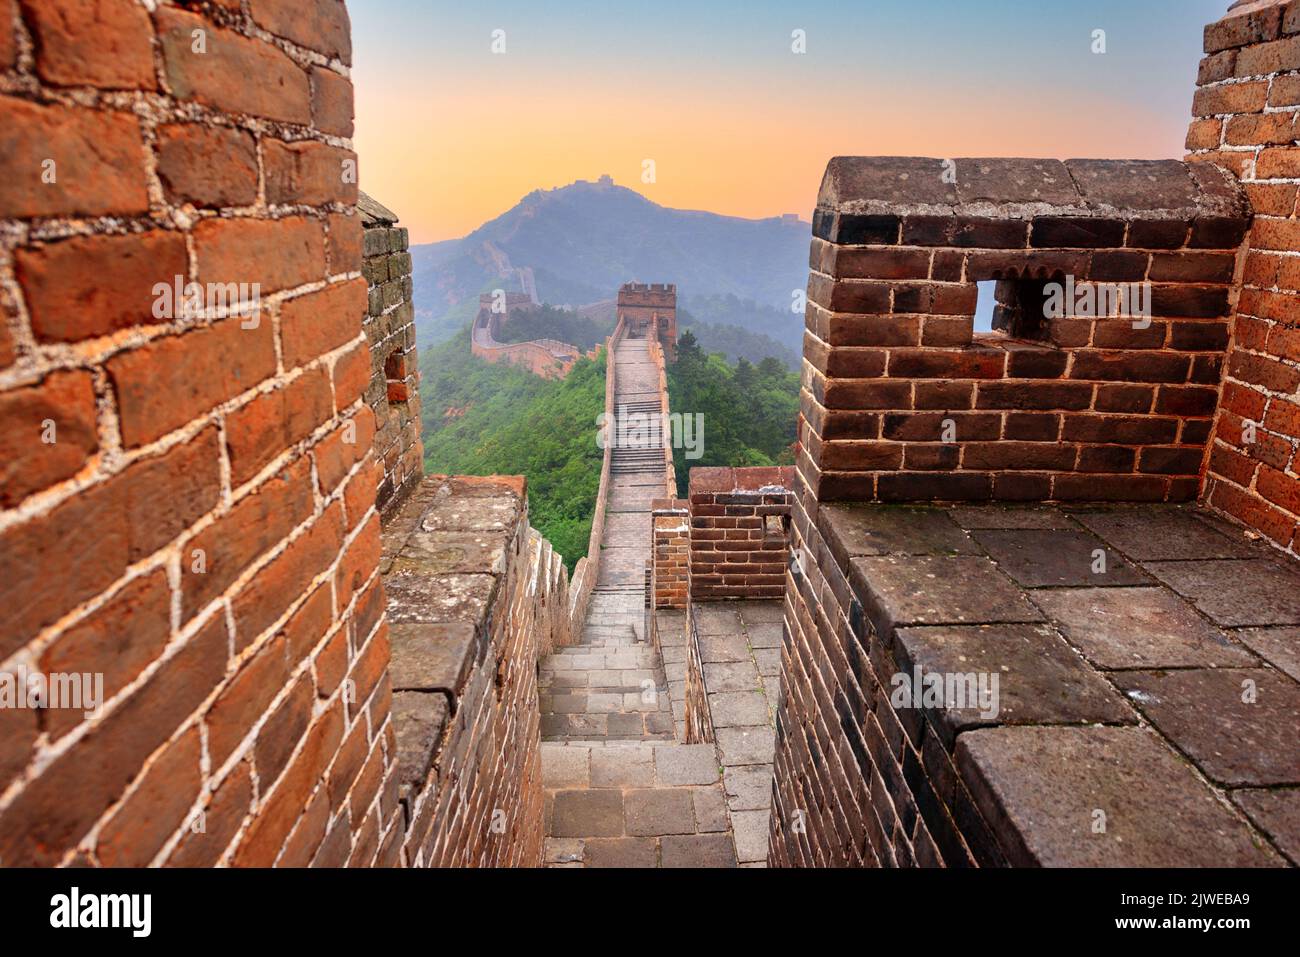 Great Wall of China viewed from within a lookout tower. Stock Photo